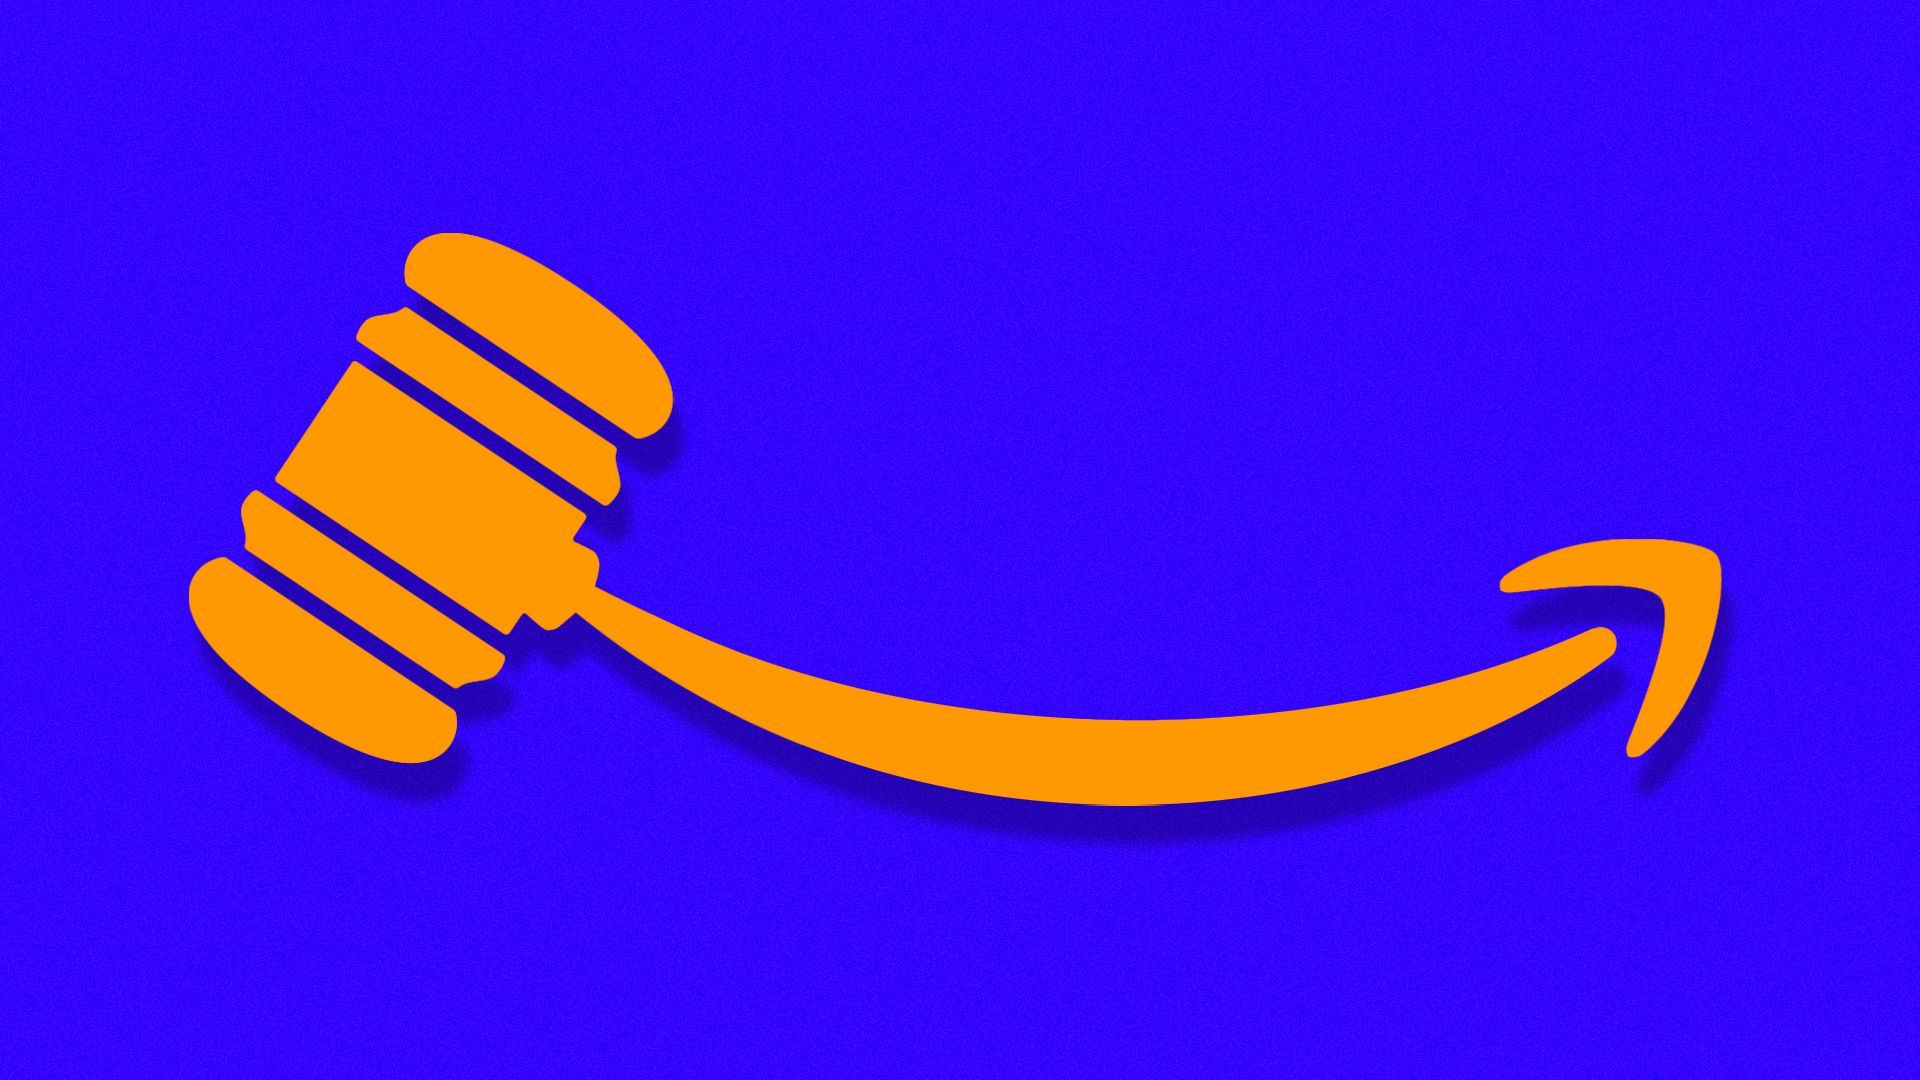 Illustration of a gavel handle made from the Amazon logo